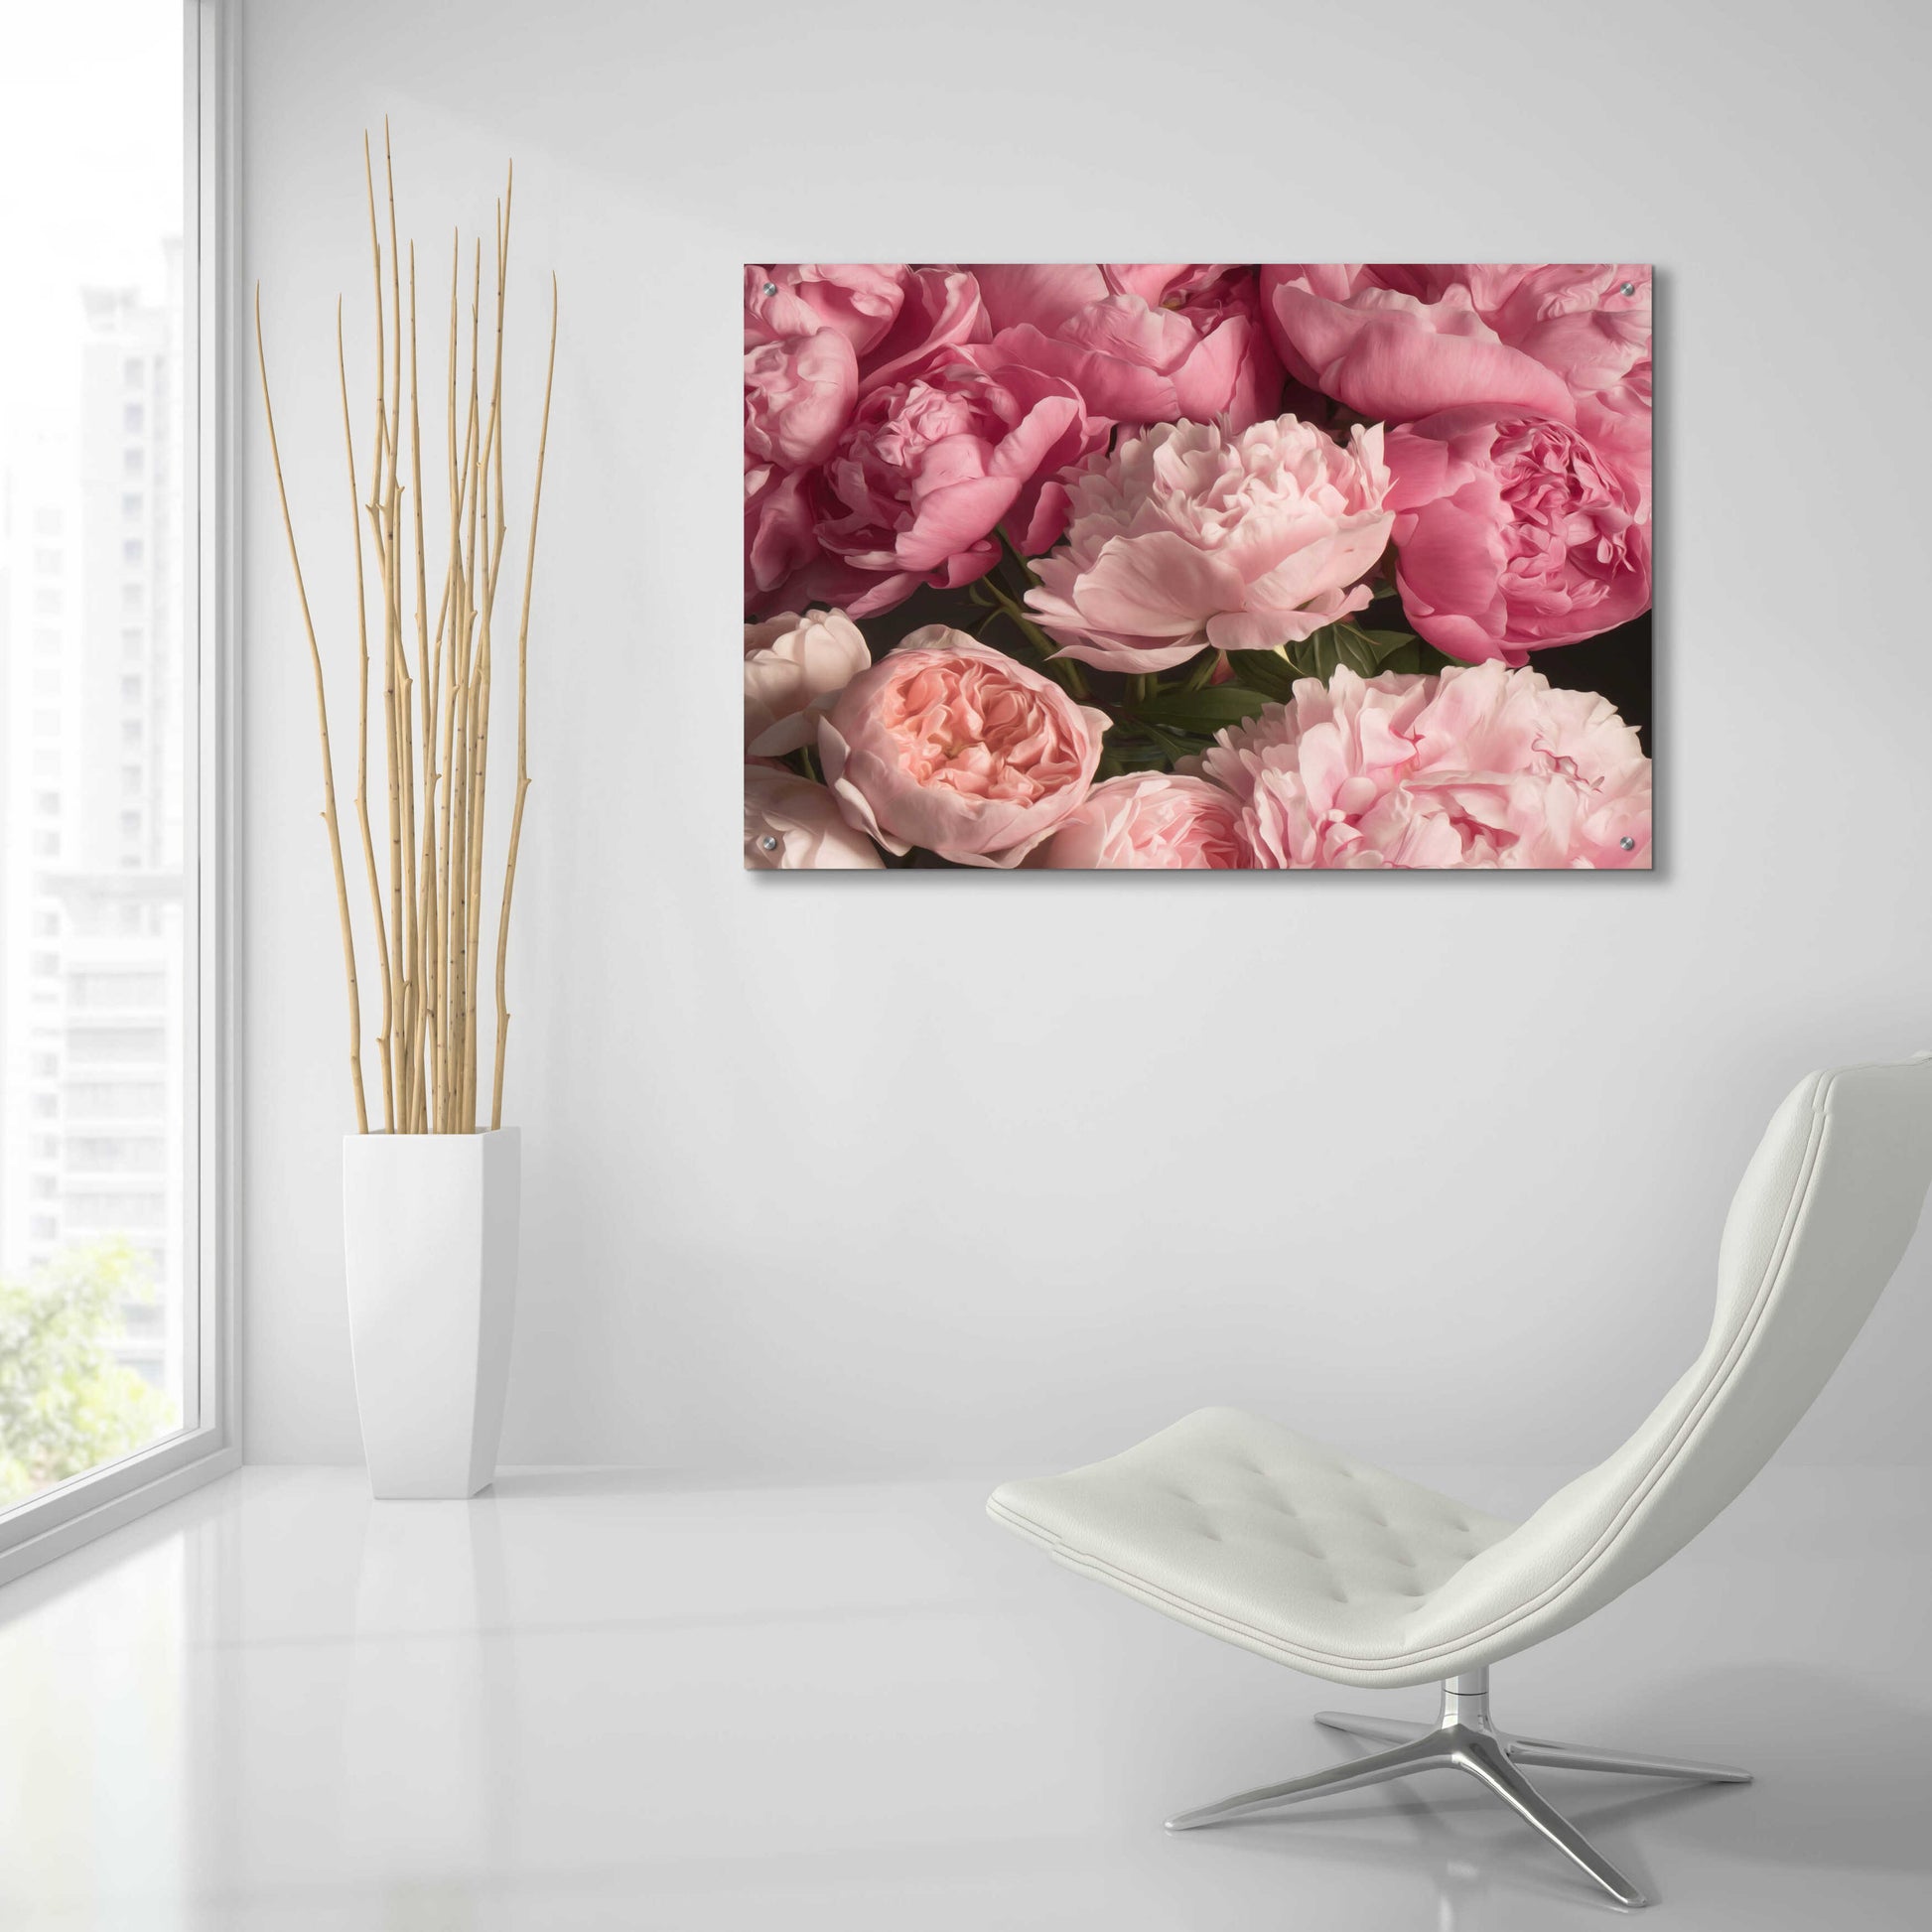 Epic Art 'Pink Petals' by Leah McLean, Acrylic Glass Wall Art,36x24